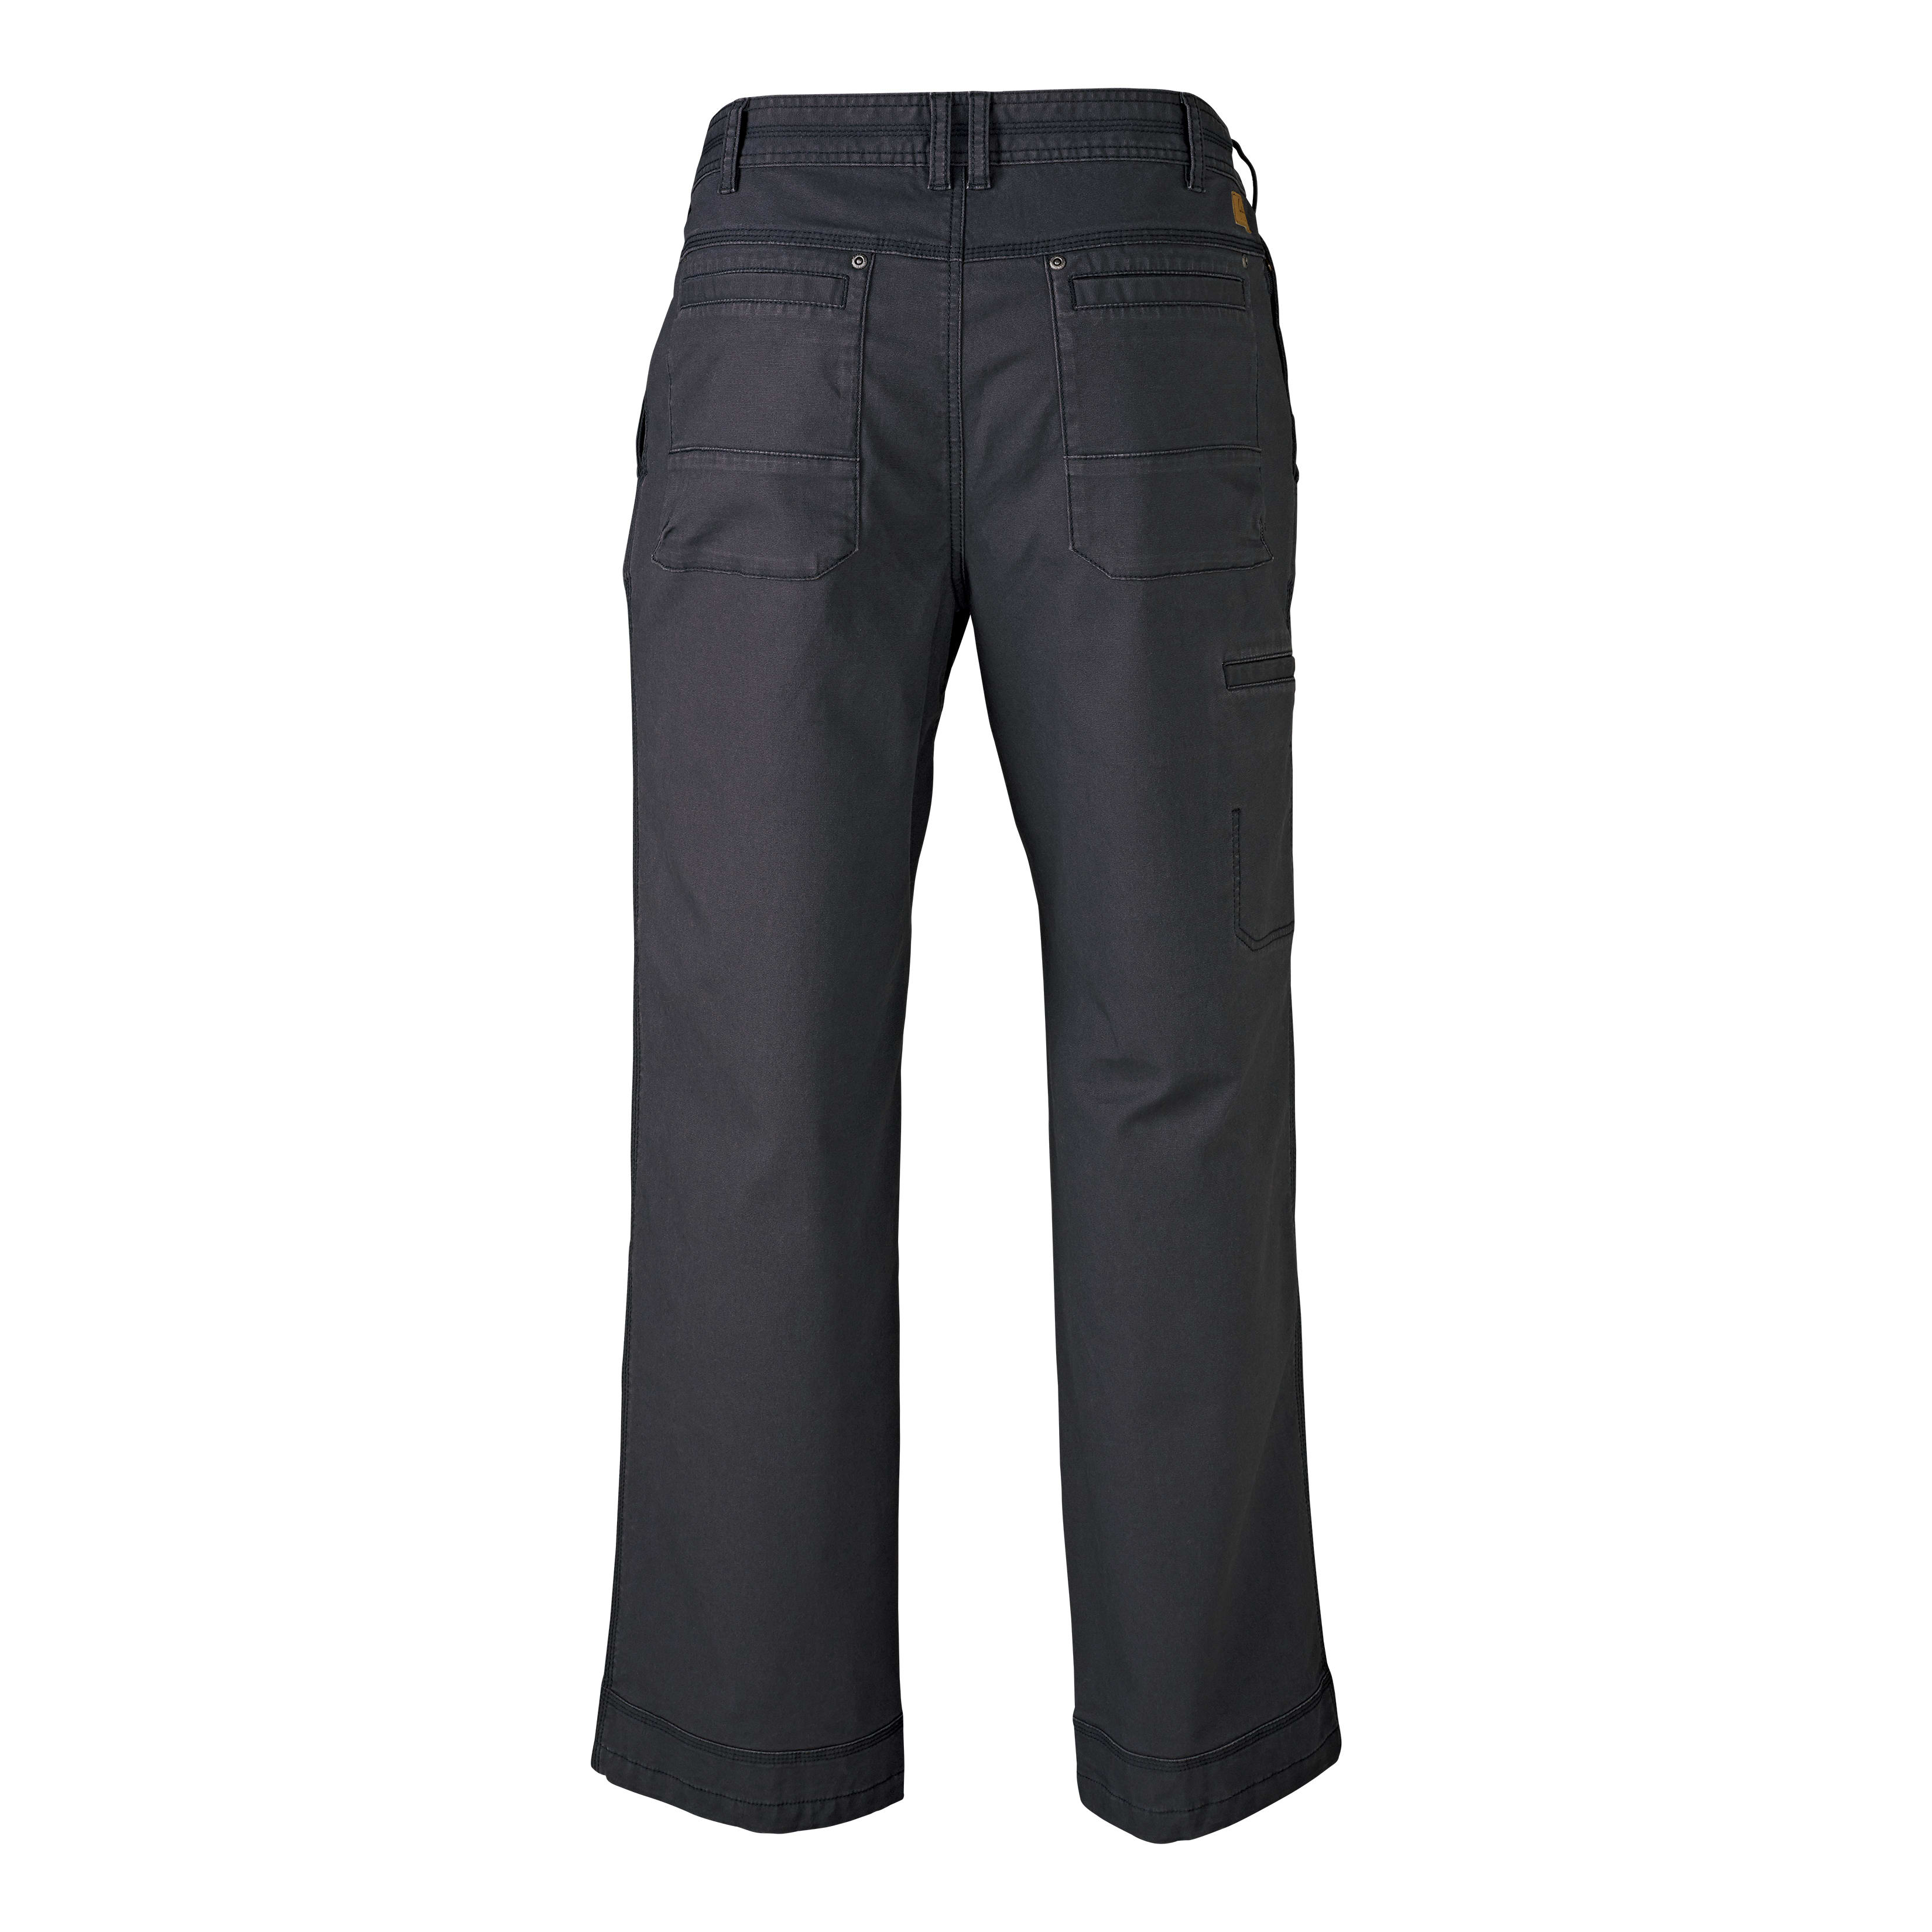 Cabela’s Ultimate Rugged Pants – 32-Inch Inseam